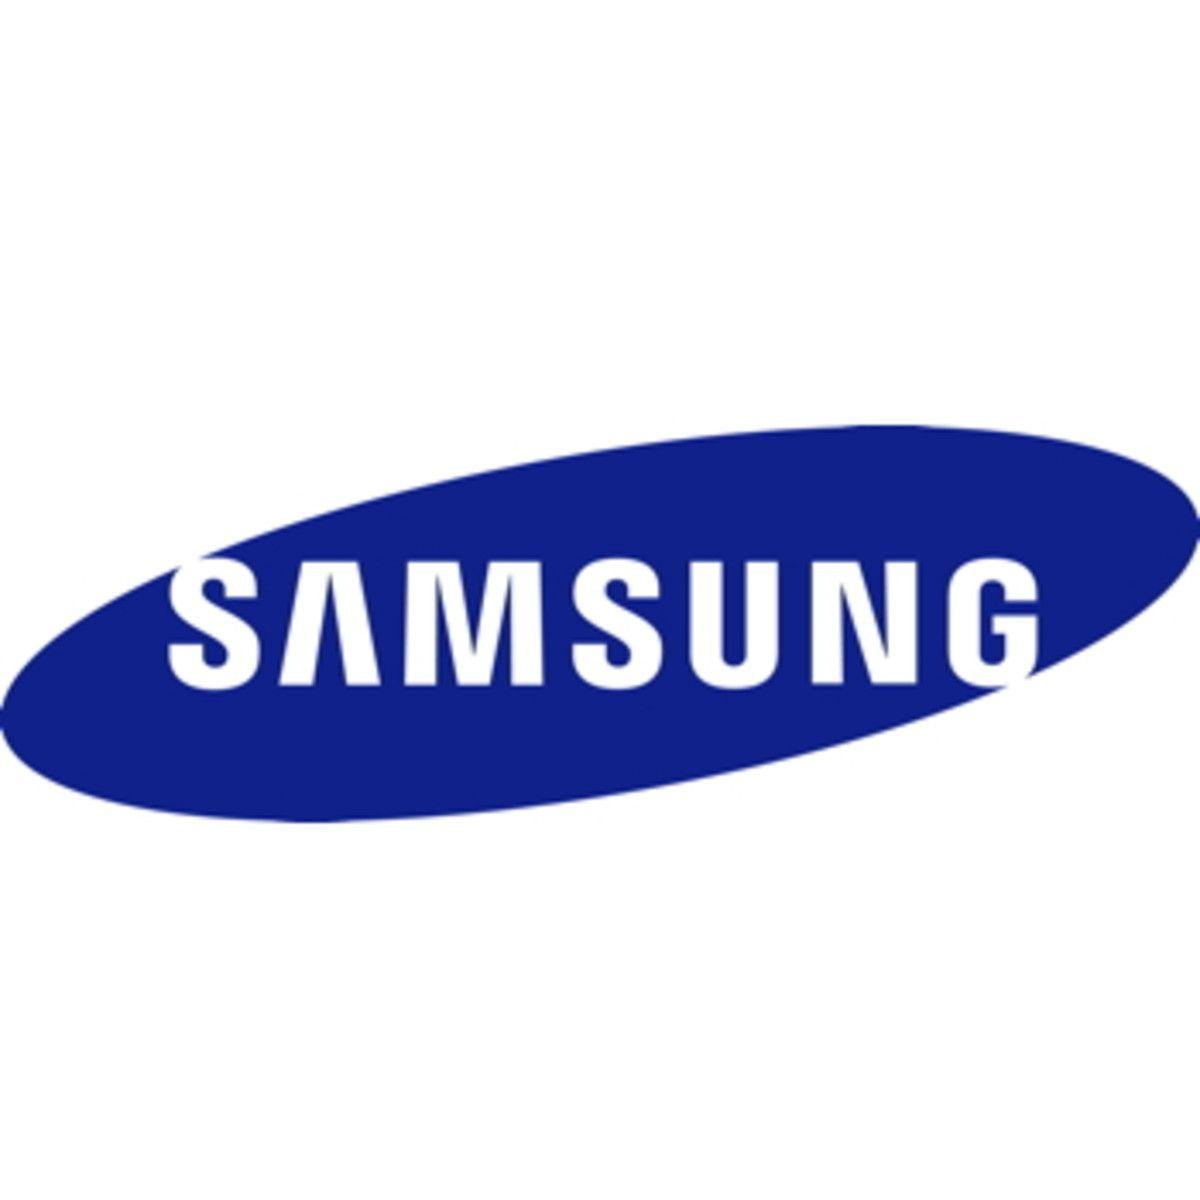 New Samsung Logo - Samsung set to launch new notebook line up in second half of 2013